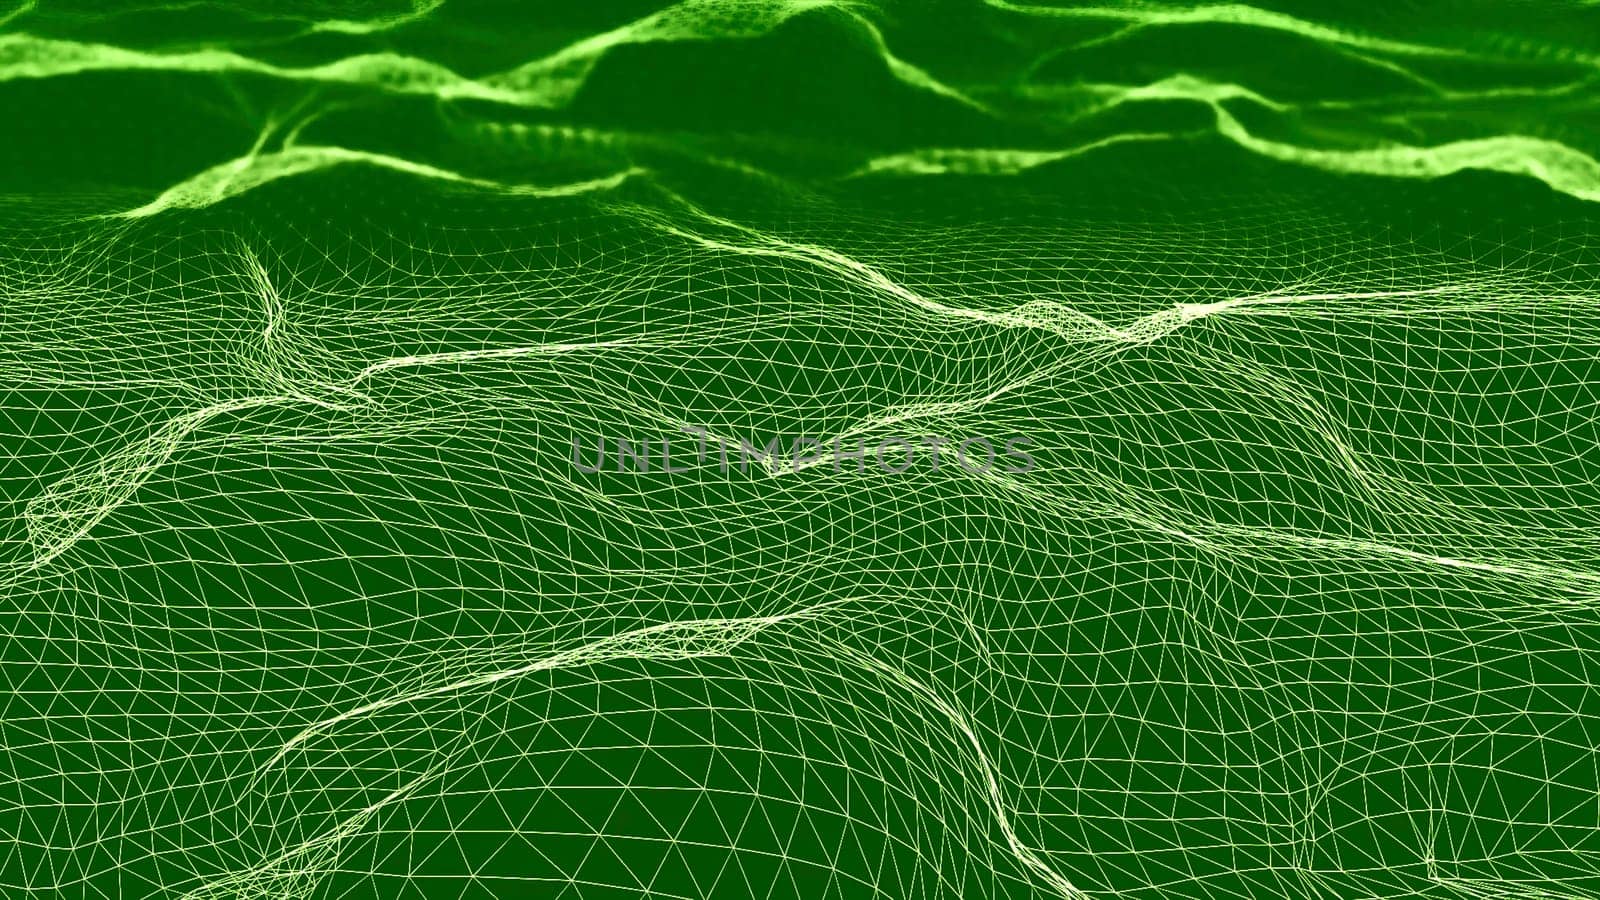 Futuristic 3D plexus bright waving terrain. Animation. Abstract technology background with network connection structure